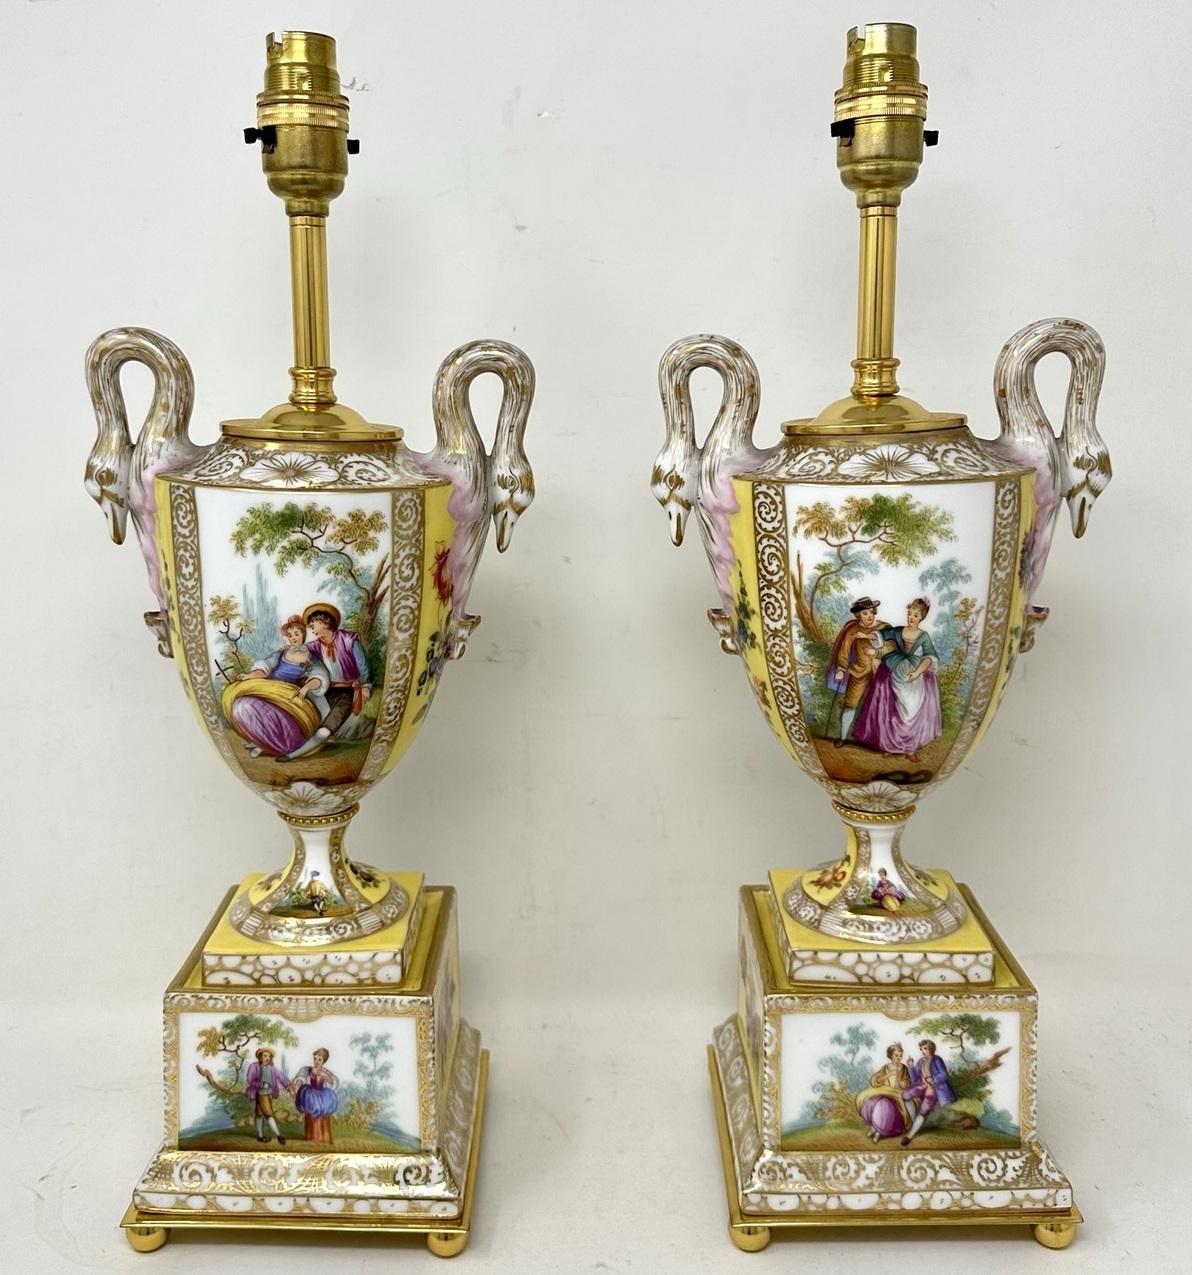 Antique Pair Austrian Royal Vienna Beehive Porcelain Gilt Mounted Table Lamps In Good Condition For Sale In Dublin, Ireland